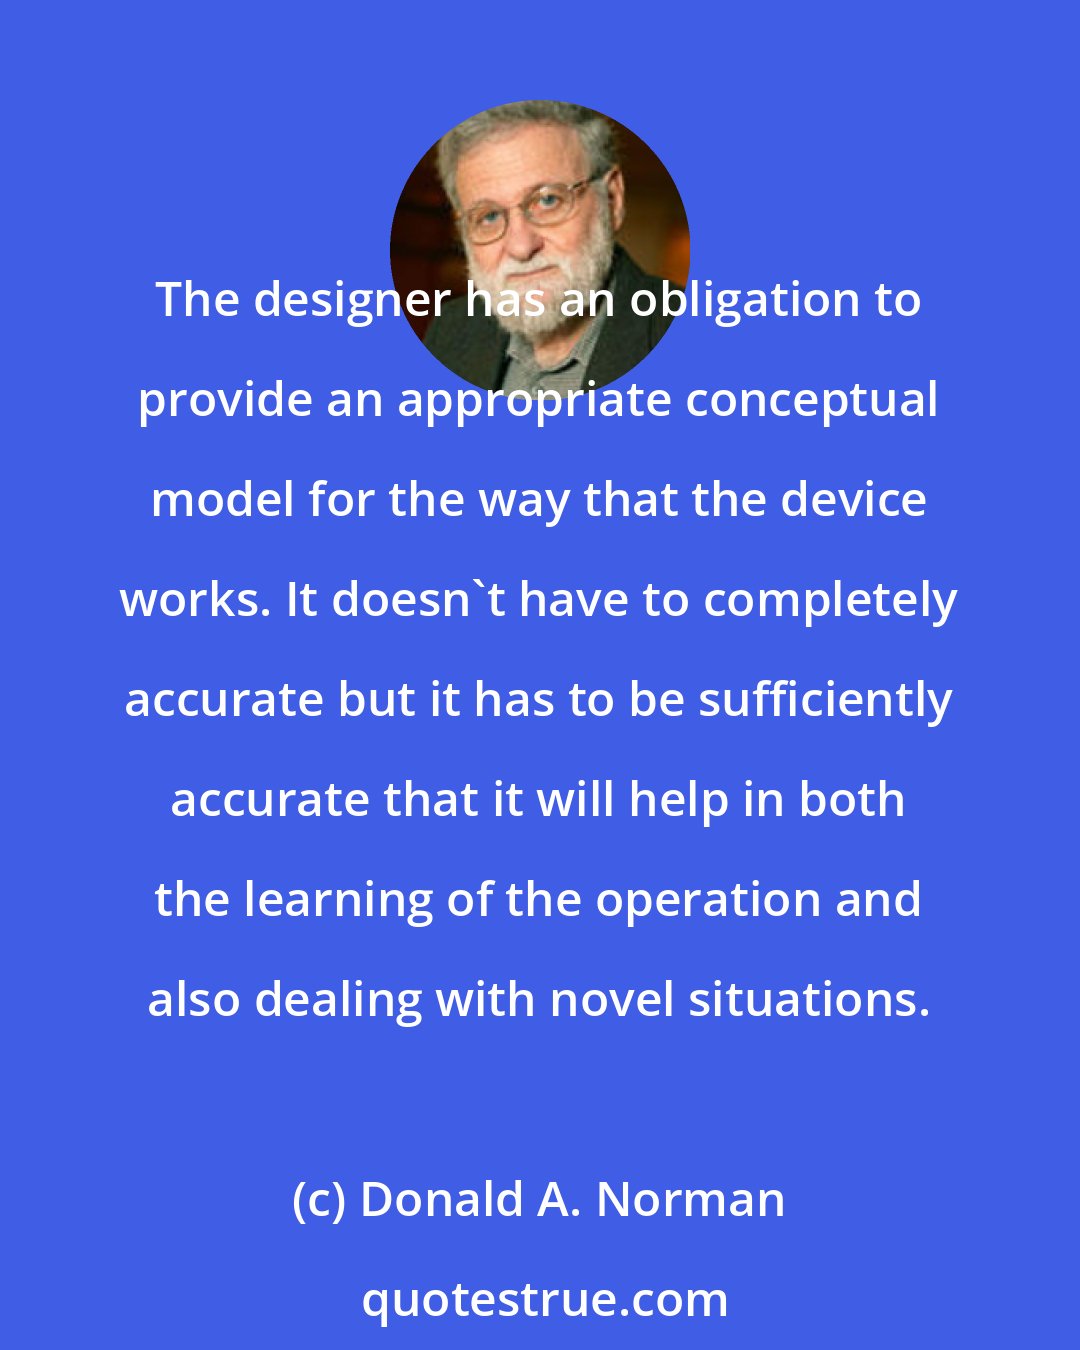 Donald A. Norman: The designer has an obligation to provide an appropriate conceptual model for the way that the device works. It doesn't have to completely accurate but it has to be sufficiently accurate that it will help in both the learning of the operation and also dealing with novel situations.